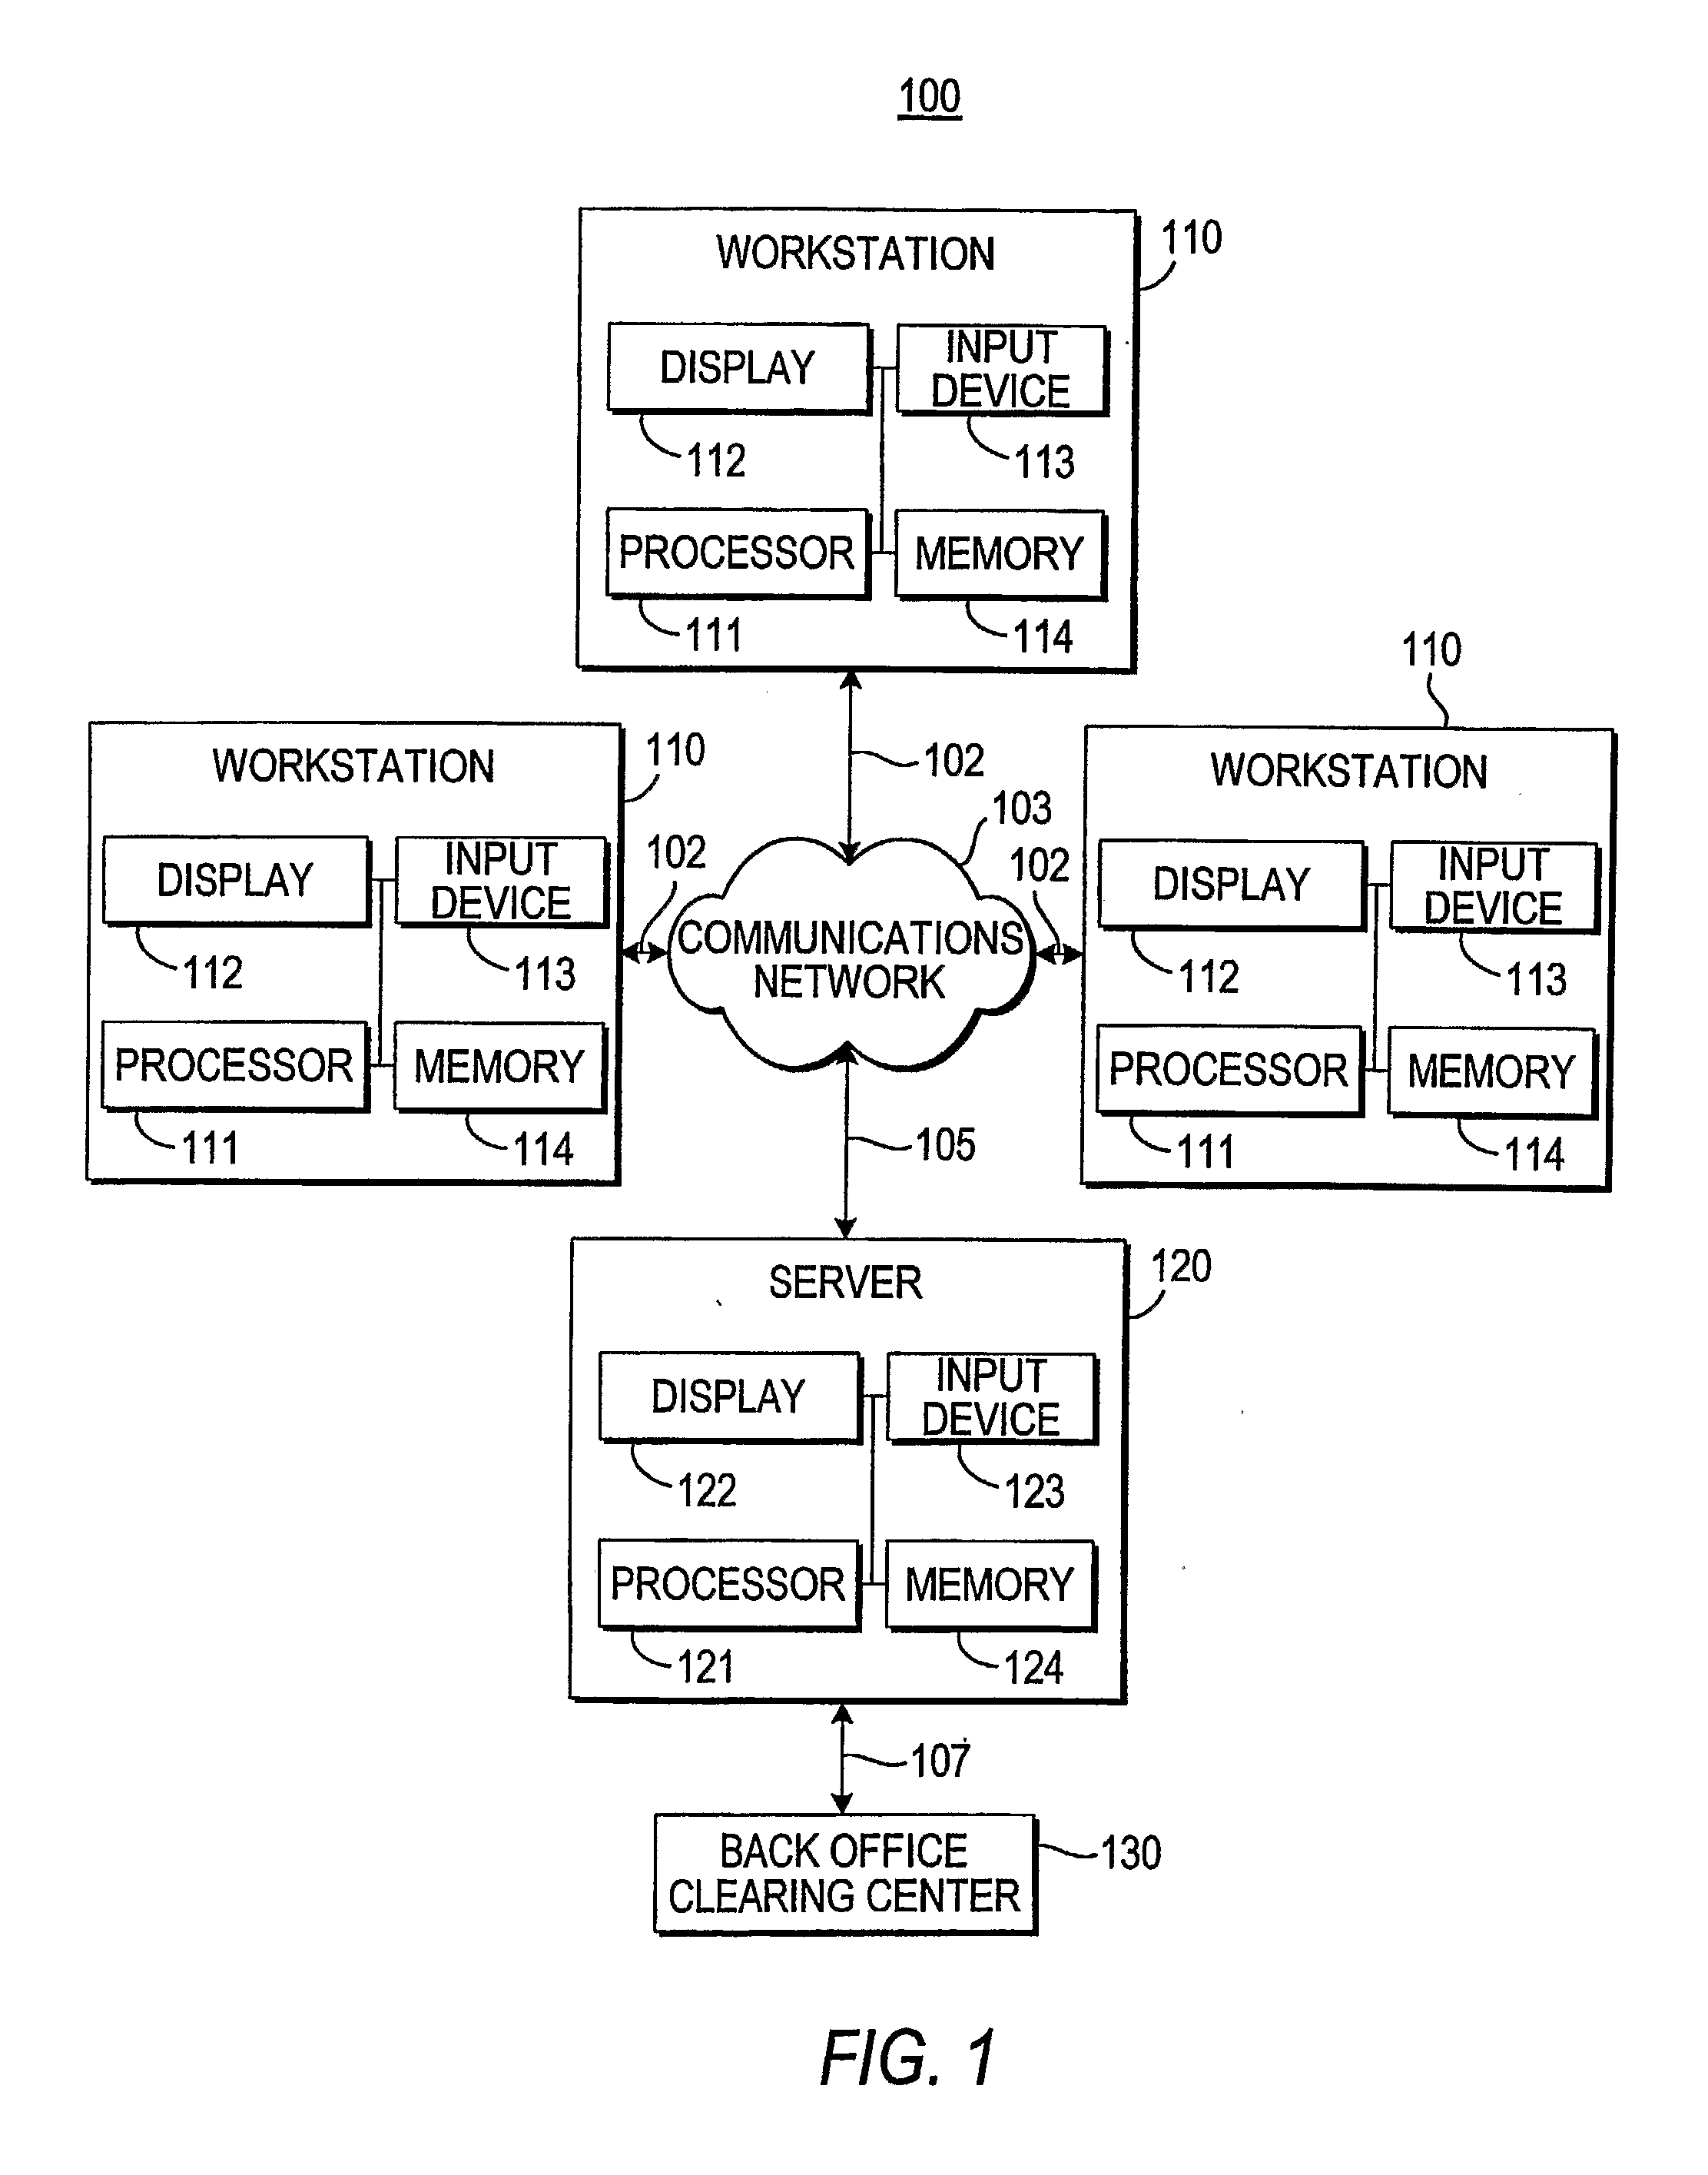 Systems and methods for providing dynamic price axes